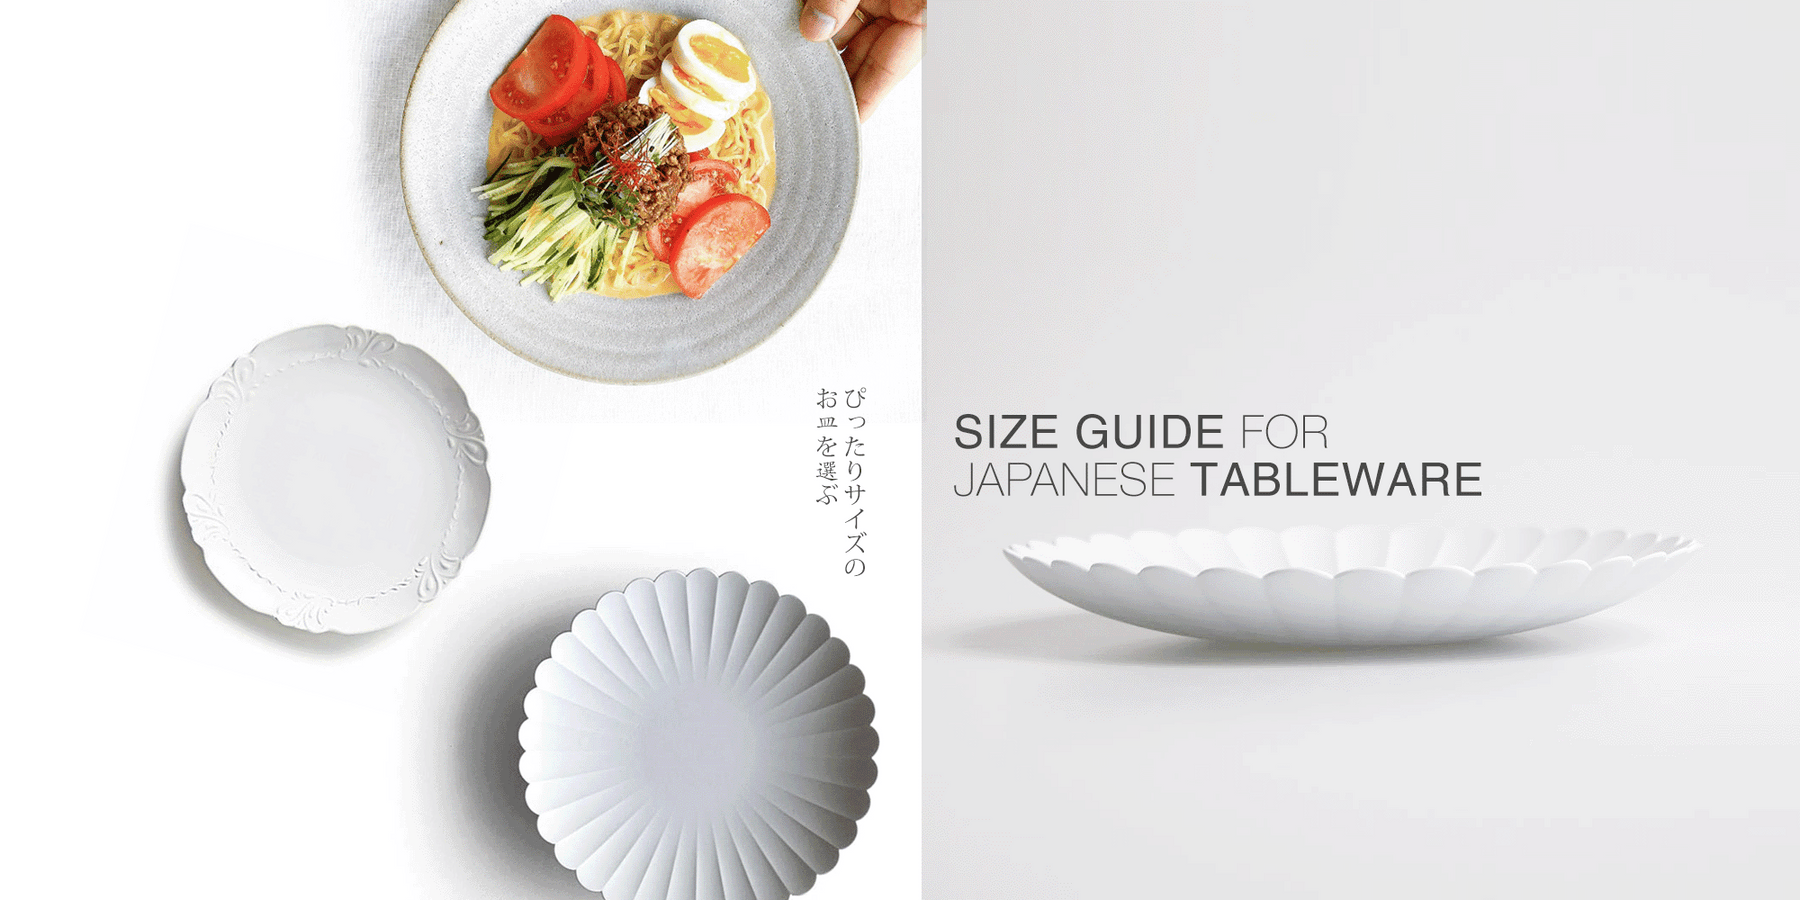 A Guide to Japanese Tableware